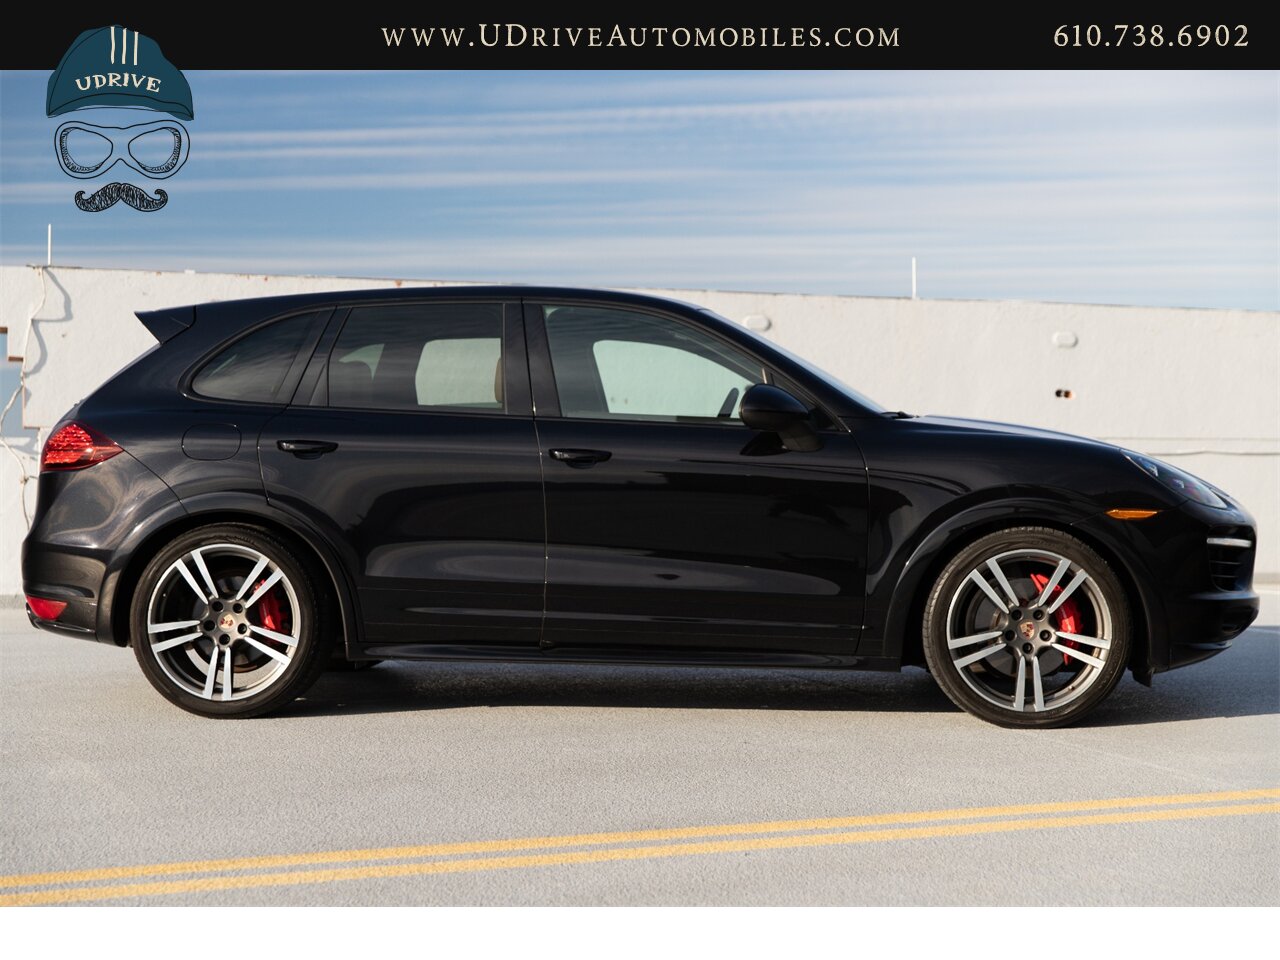 2013 Porsche Cayenne GTS Service History 1 Owner 21in Wheels  Espresso / Cognac Two Tone Leather - Photo 18 - West Chester, PA 19382